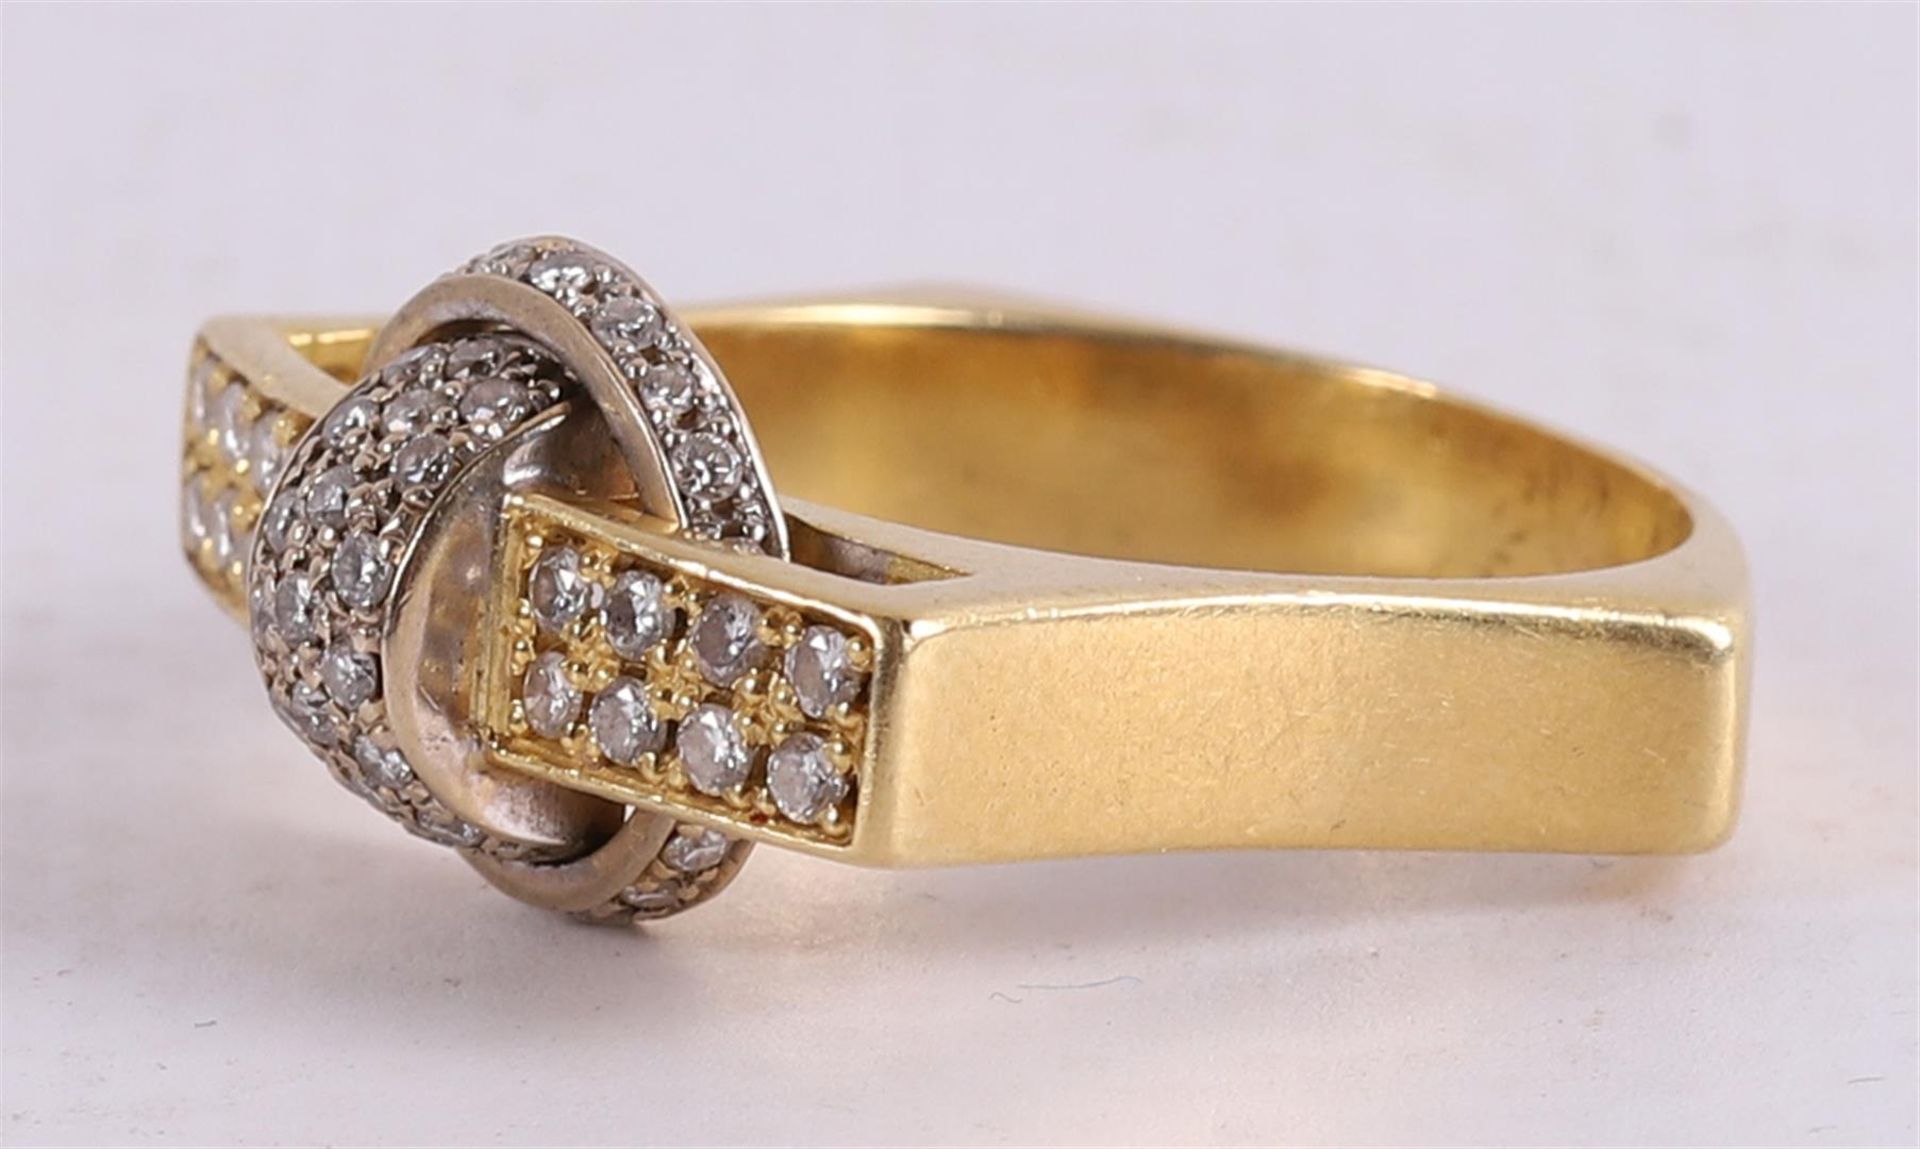 A 14 kt 585/1000 yellow gold men's ring, set with many brilliants. - Image 3 of 3